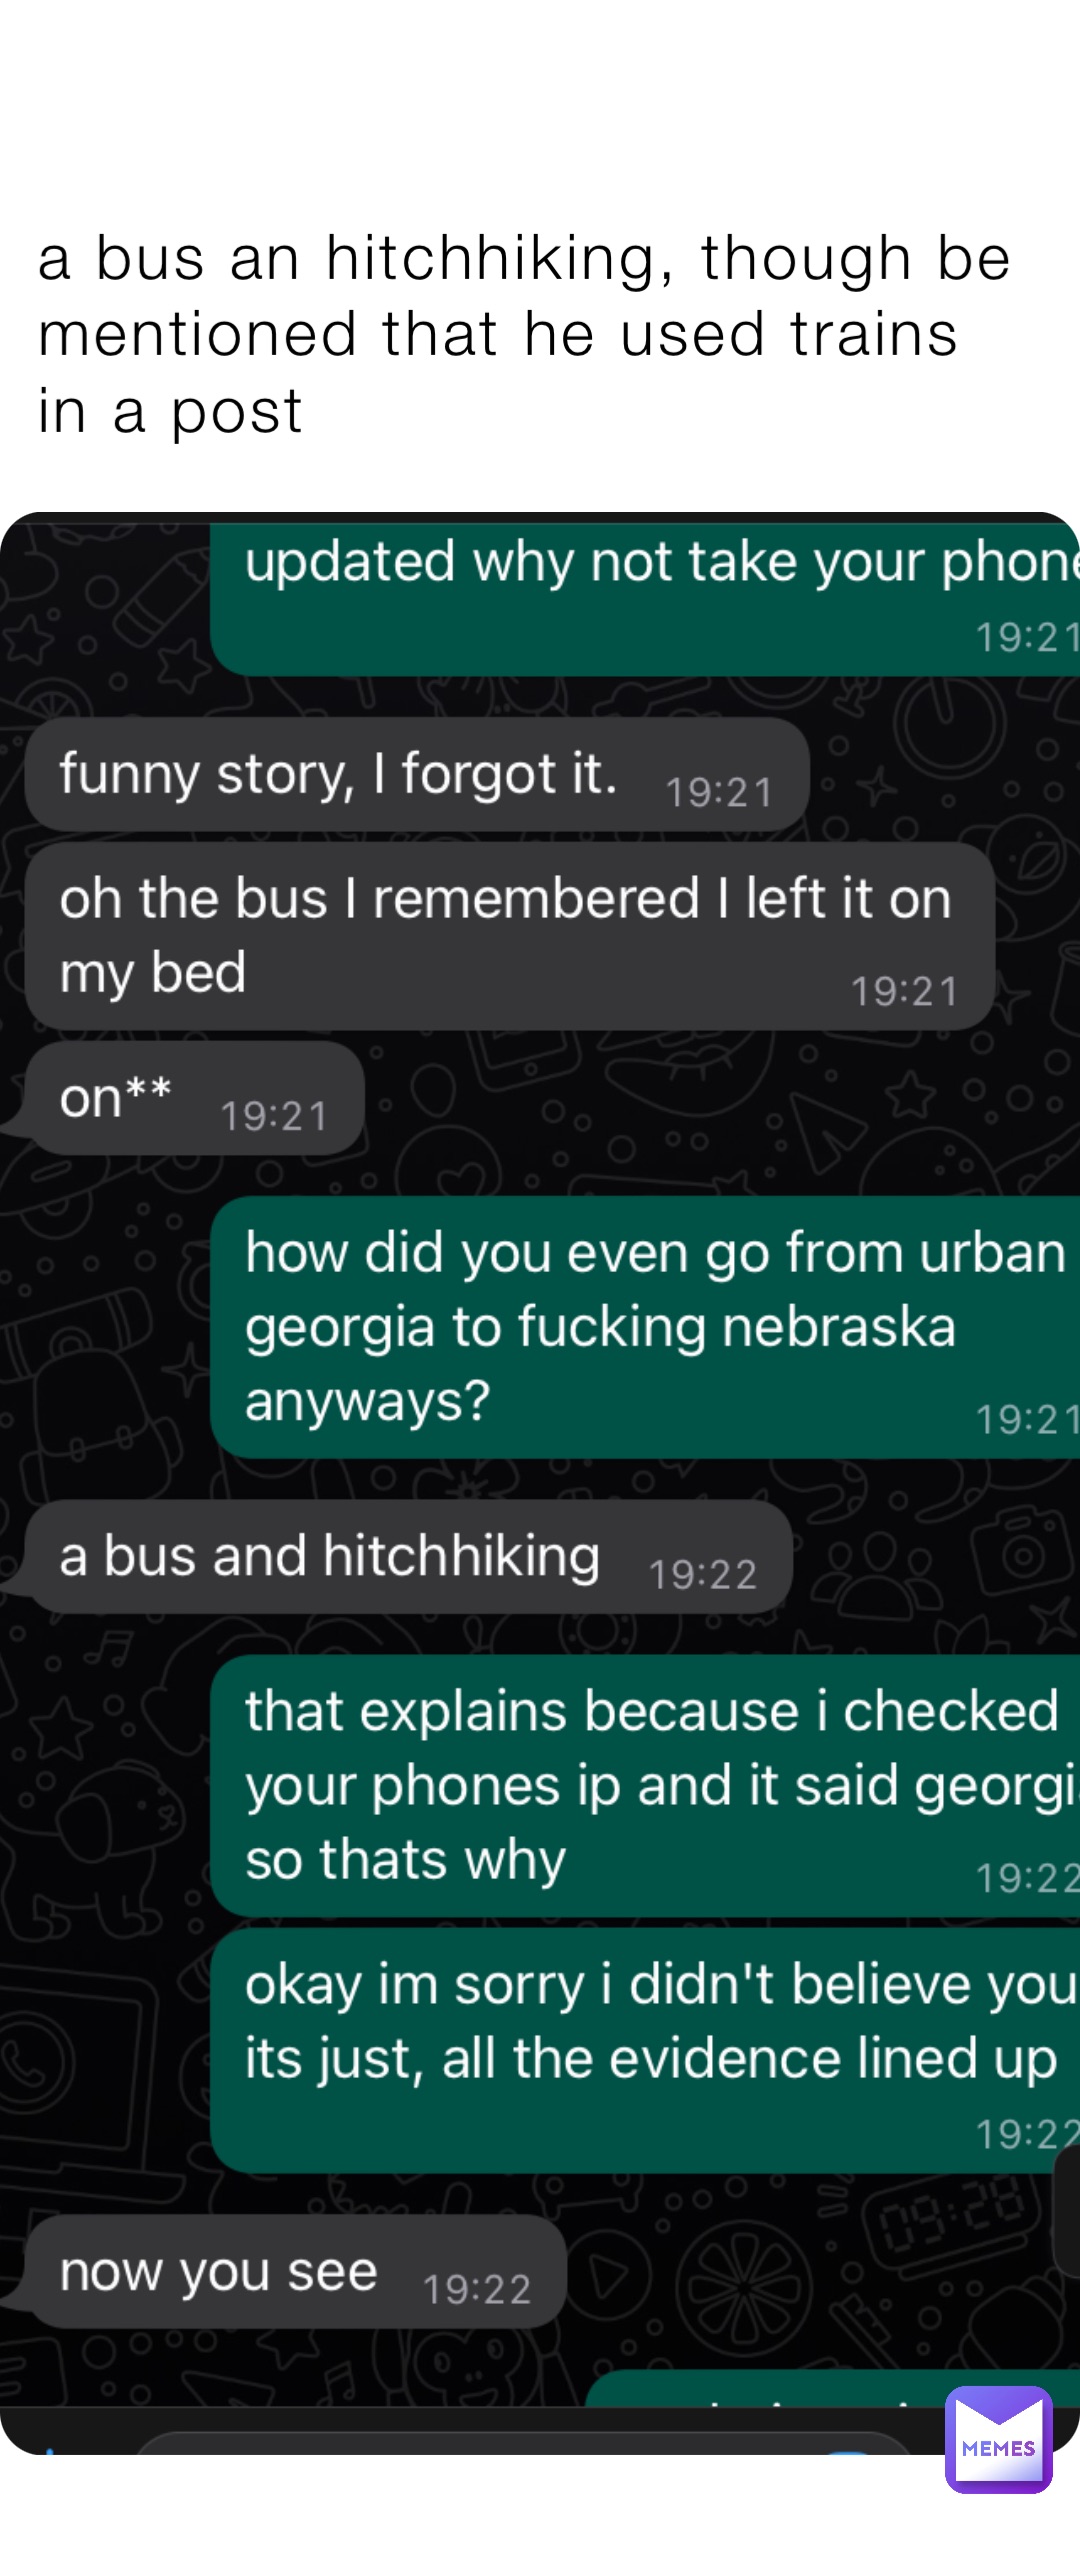 a bus an hitchhiking, though be mentioned that he used trains in a post